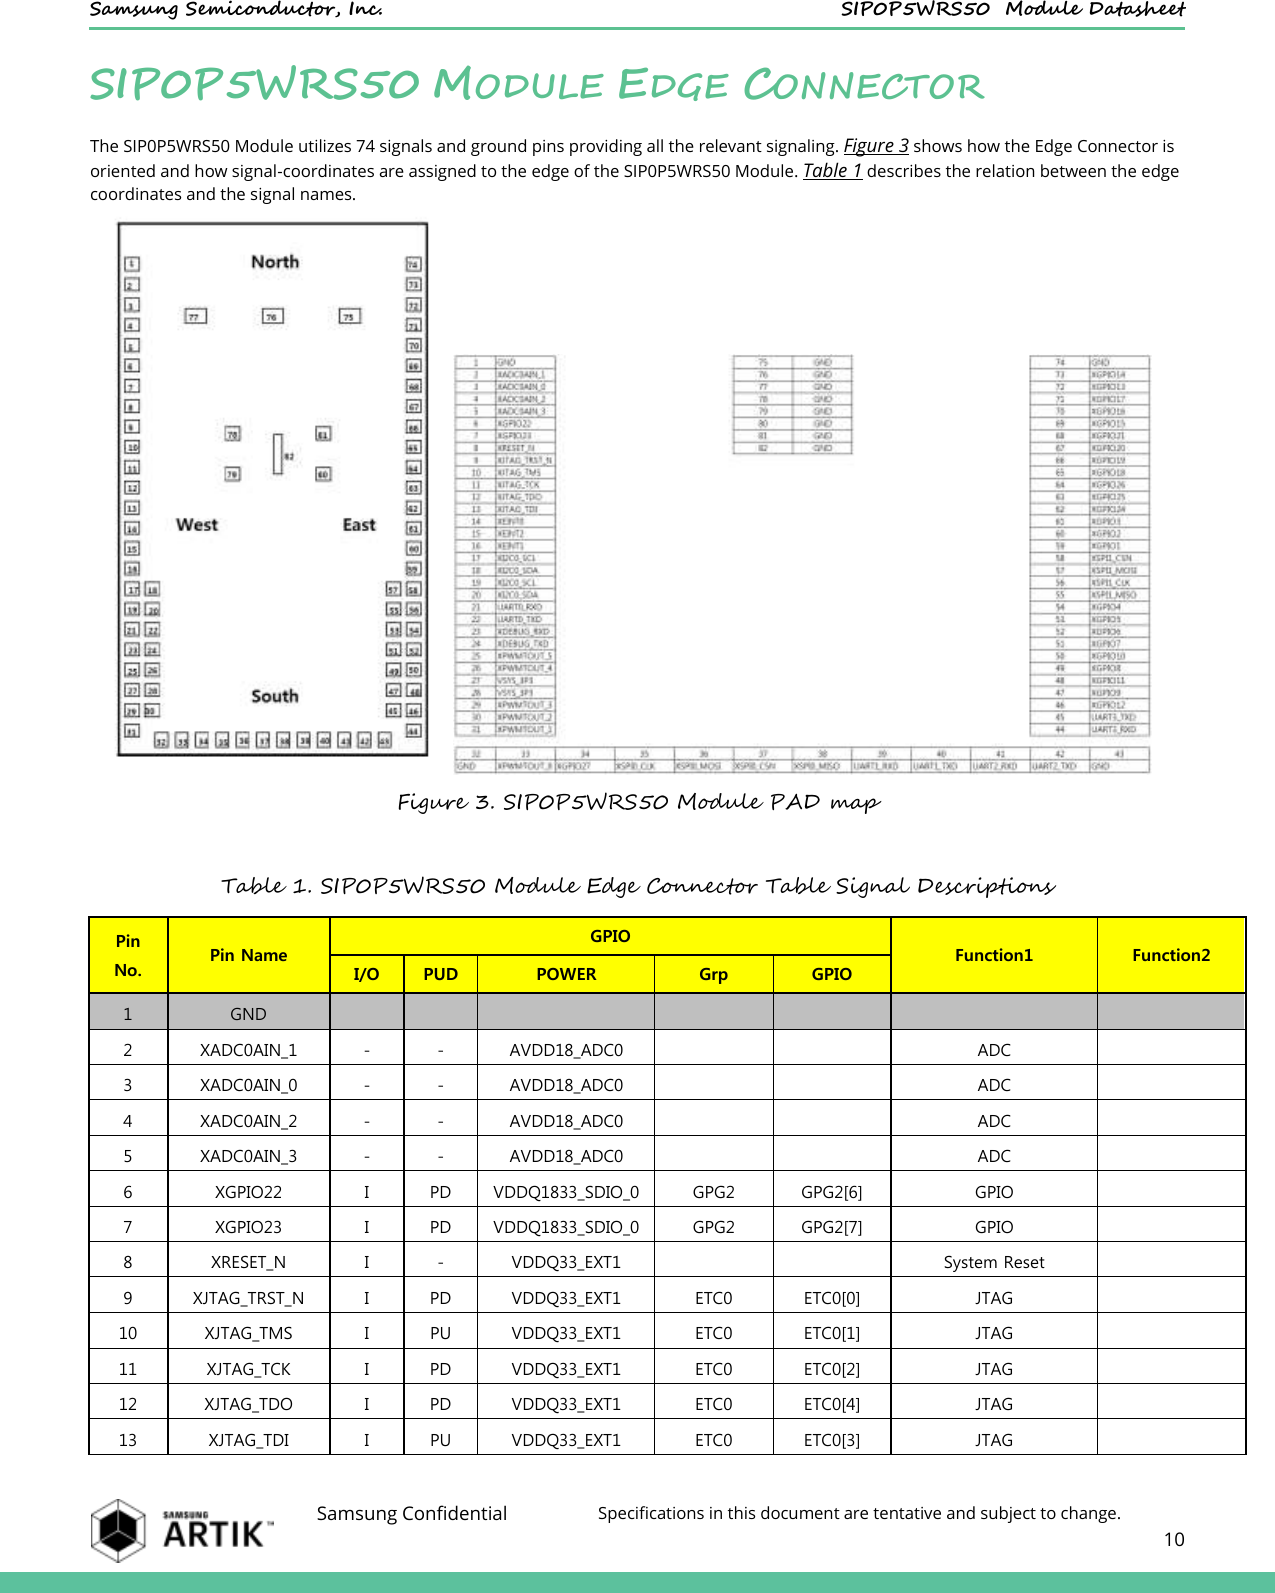    Samsung Semiconductor, Inc.  SIP0P5WRS50  Module Datasheet    Samsung Confidential Specifications in this document are tentative and subject to change.  10  SIP0P5WRS50 MODULE EDGE CONNECTOR The SIP0P5WRS50 Module utilizes 74 signals and ground pins providing all the relevant signaling. Figure 3 shows how the Edge Connector is oriented and how signal-coordinates are assigned to the edge of the SIP0P5WRS50 Module. Table 1 describes the relation between the edge coordinates and the signal names.     Figure 3. SIP0P5WRS50 Module PAD map  Table 1. SIP0P5WRS50 Module Edge Connector Table Signal Descriptions Pin No. Pin Name GPIO Function1 Function2 I/O PUD POWER Grp GPIO 1 GND                      2 XADC0AIN_1 - - AVDD18_ADC0       ADC    3 XADC0AIN_0 - - AVDD18_ADC0       ADC    4 XADC0AIN_2 - - AVDD18_ADC0       ADC    5 XADC0AIN_3 - - AVDD18_ADC0       ADC    6 XGPIO22 I PD VDDQ1833_SDIO_0 GPG2 GPG2[6] GPIO    7 XGPIO23 I PD VDDQ1833_SDIO_0 GPG2 GPG2[7] GPIO    8 XRESET_N I - VDDQ33_EXT1       System Reset    9 XJTAG_TRST_N I PD VDDQ33_EXT1 ETC0 ETC0[0] JTAG    10 XJTAG_TMS I PU VDDQ33_EXT1 ETC0 ETC0[1] JTAG    11 XJTAG_TCK I PD VDDQ33_EXT1 ETC0 ETC0[2] JTAG    12 XJTAG_TDO I PD VDDQ33_EXT1 ETC0 ETC0[4] JTAG    13 XJTAG_TDI I PU VDDQ33_EXT1 ETC0 ETC0[3] JTAG    